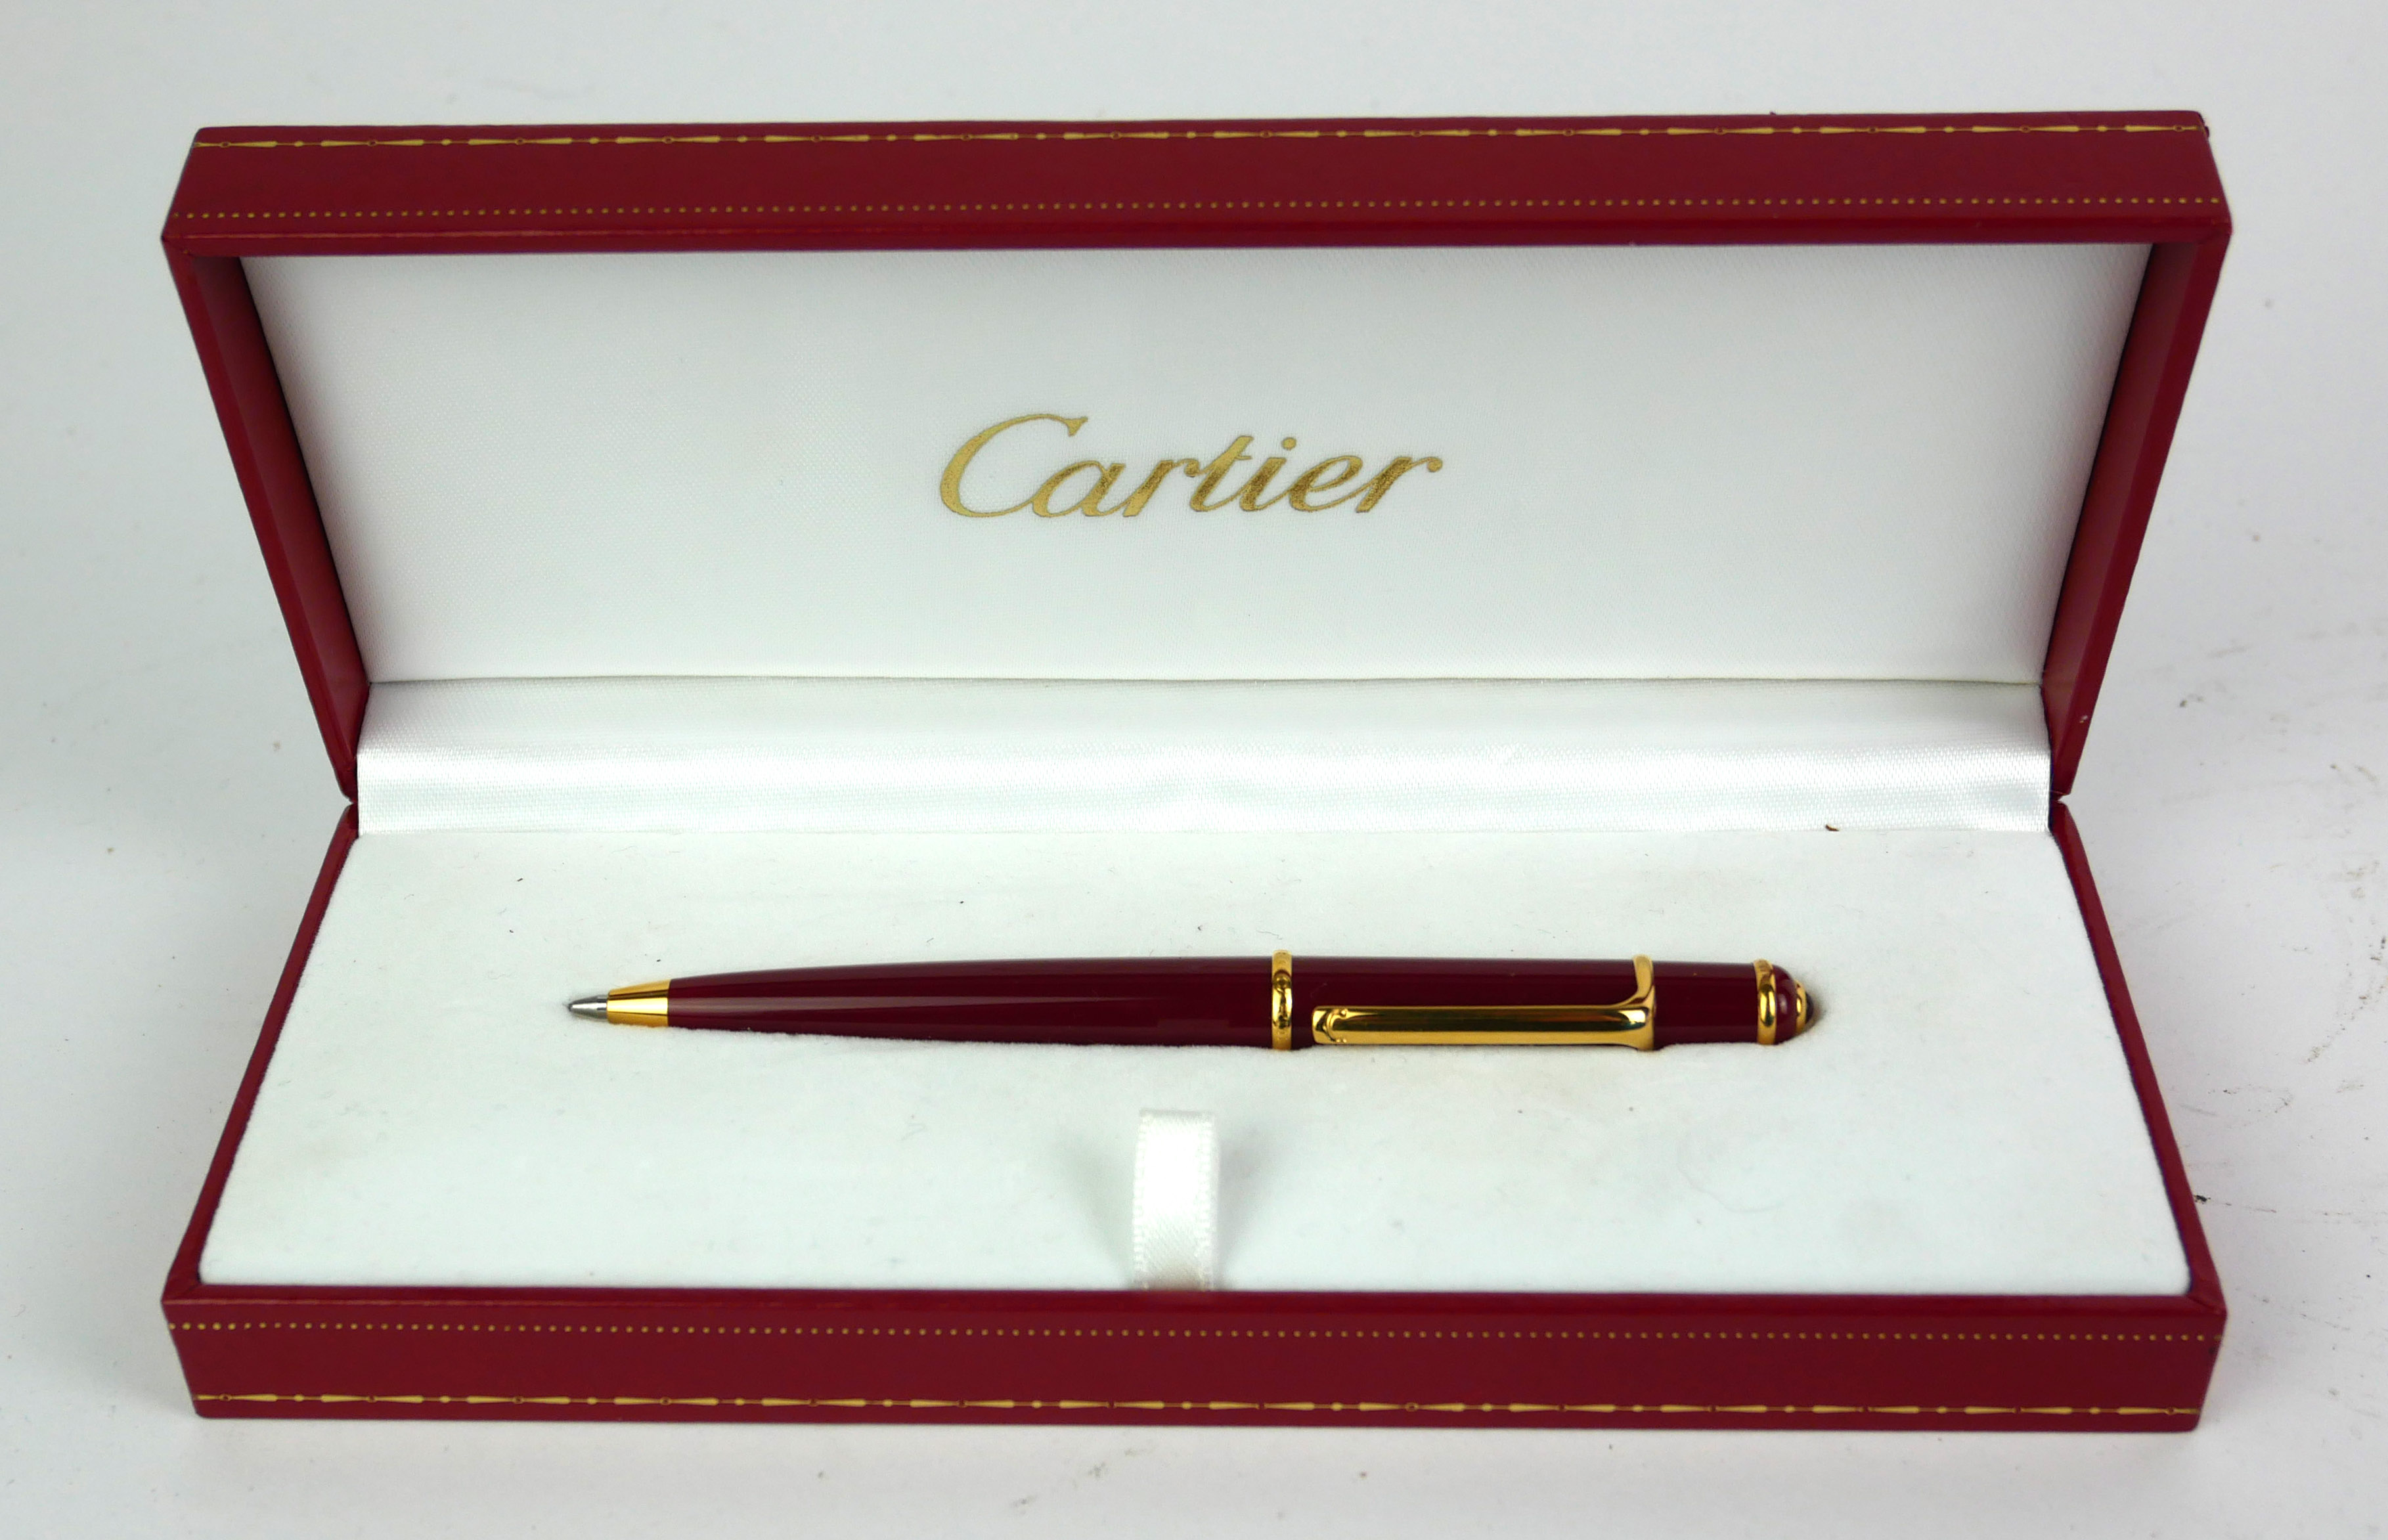 CARTIER, A VINTAGE BALLPOINT PEN Rouge case with gold plated clip, in a fitted Cartier box. (